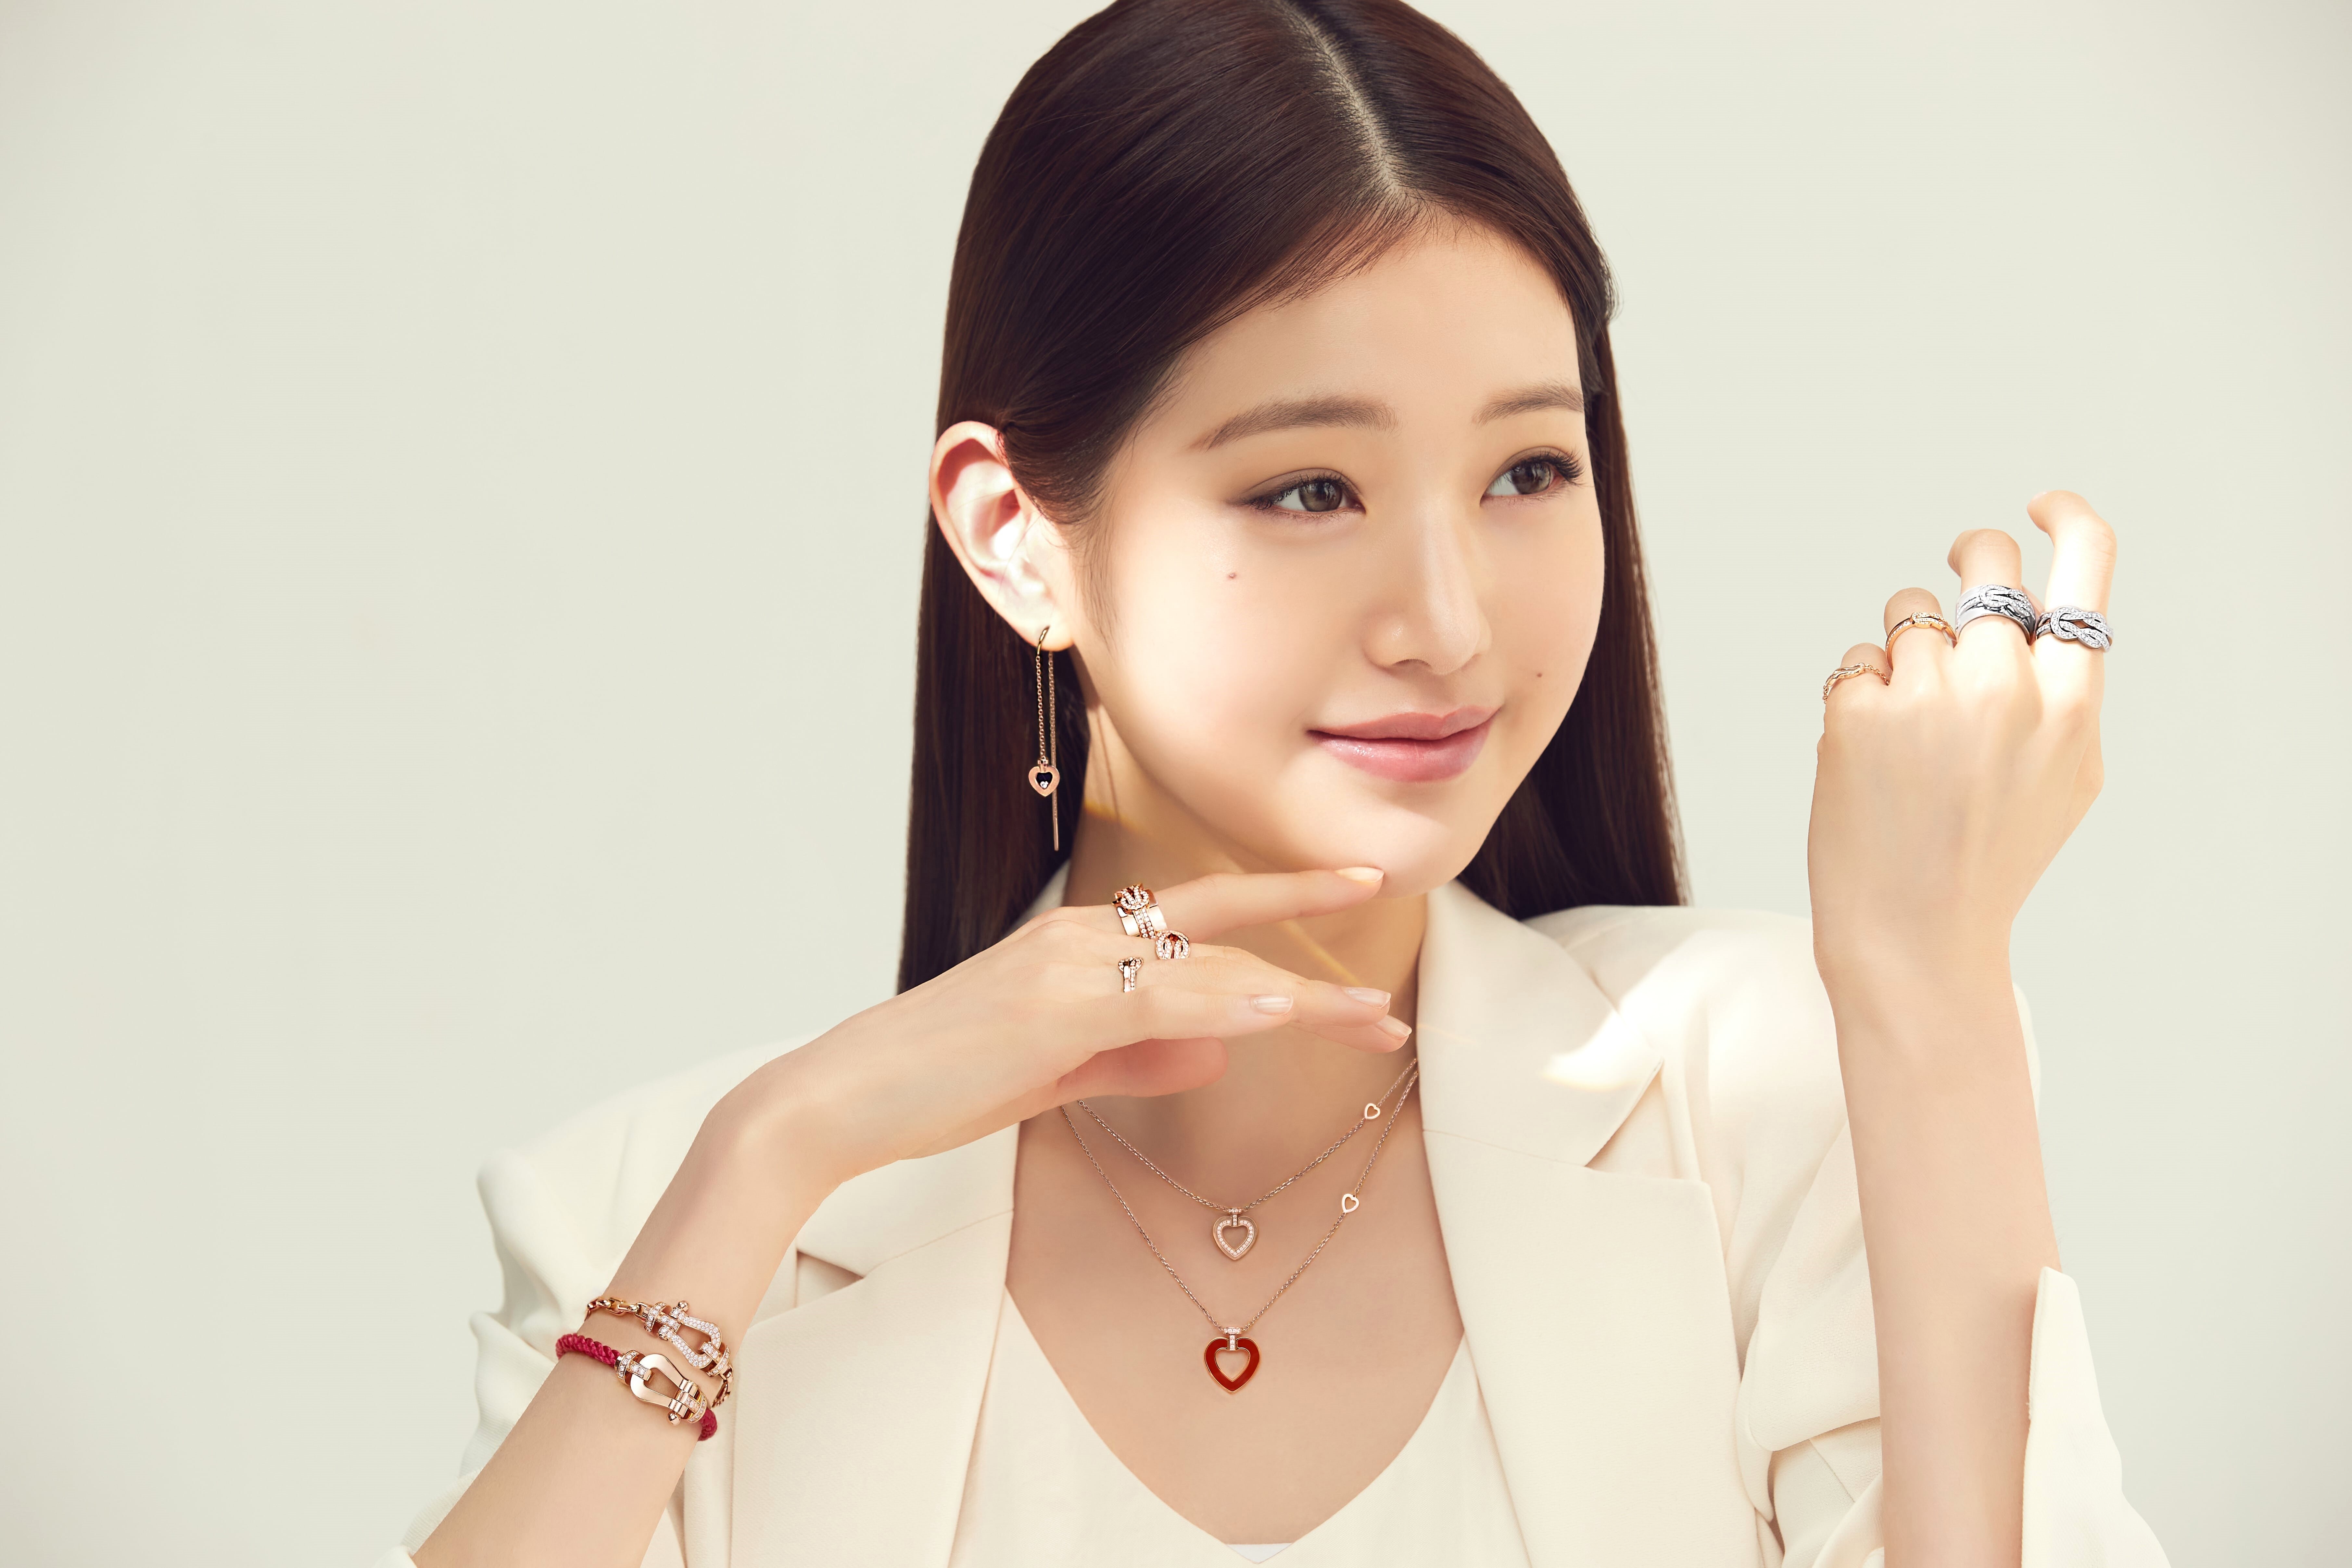 IVE's Wonyoung Looks Gorgeous Than Ever At A Fred Jewelry Event 